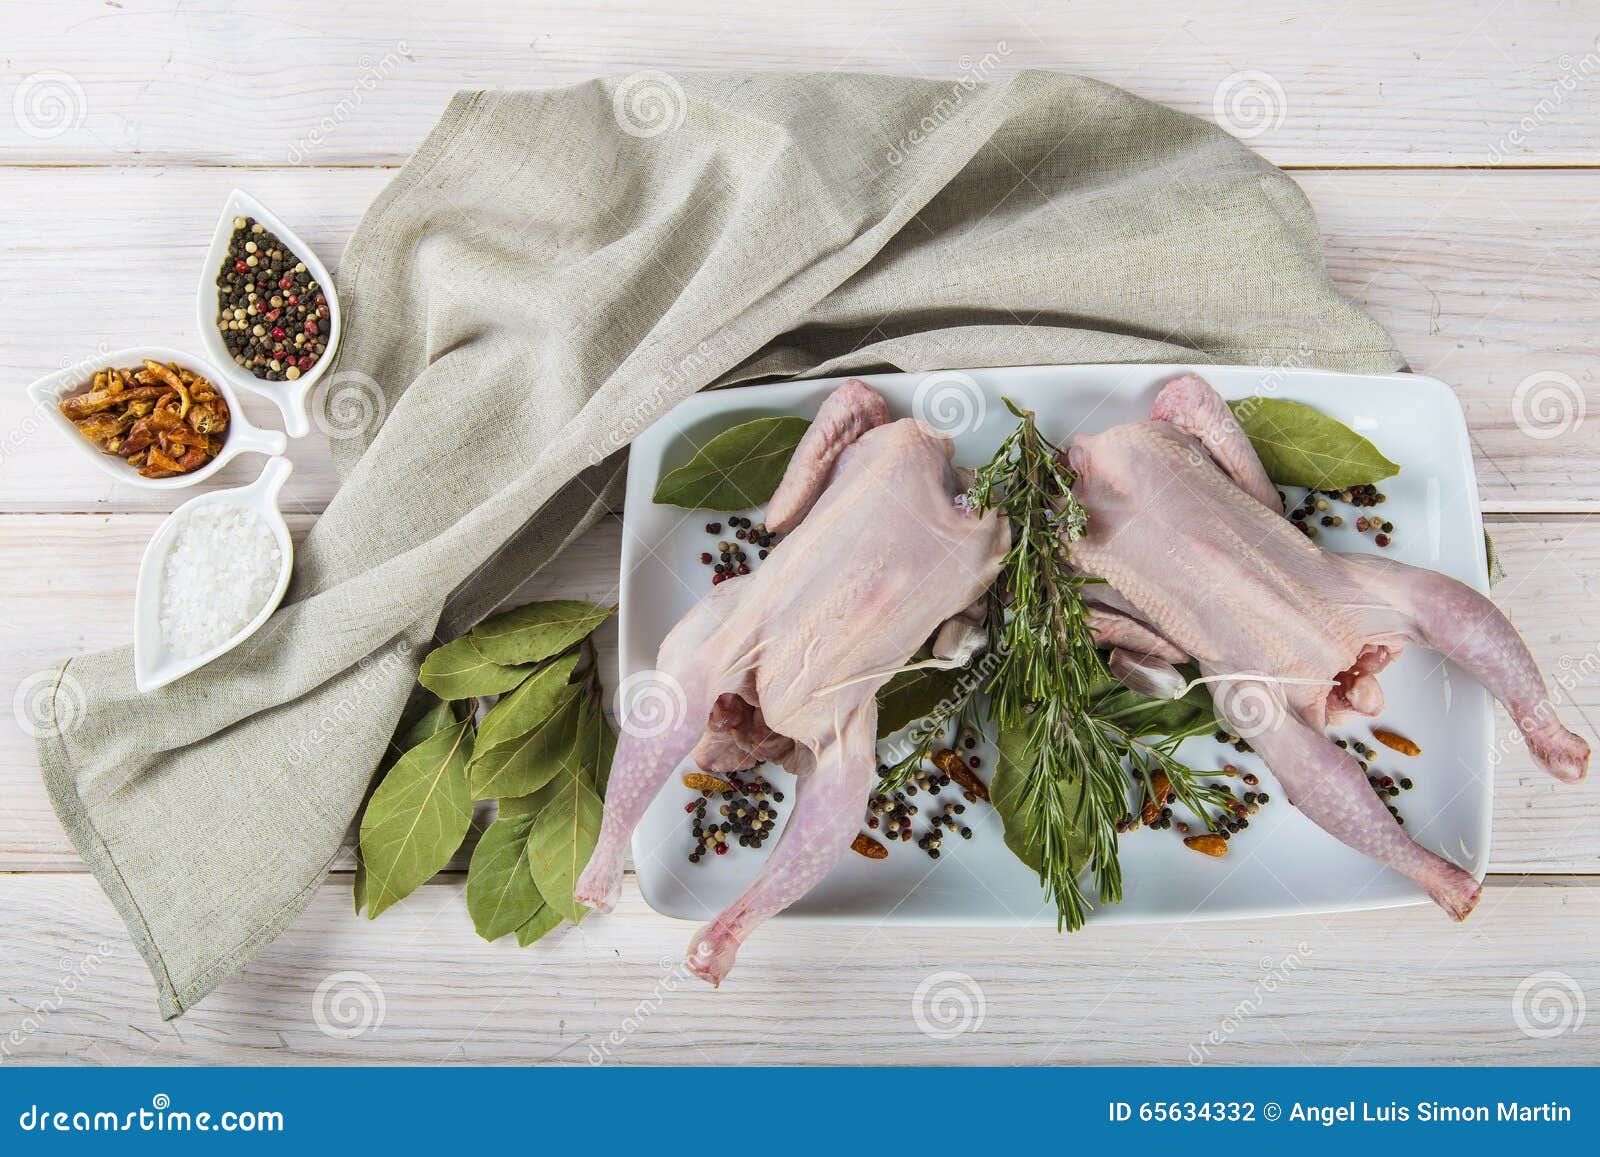 raw poussin with herbs and spices